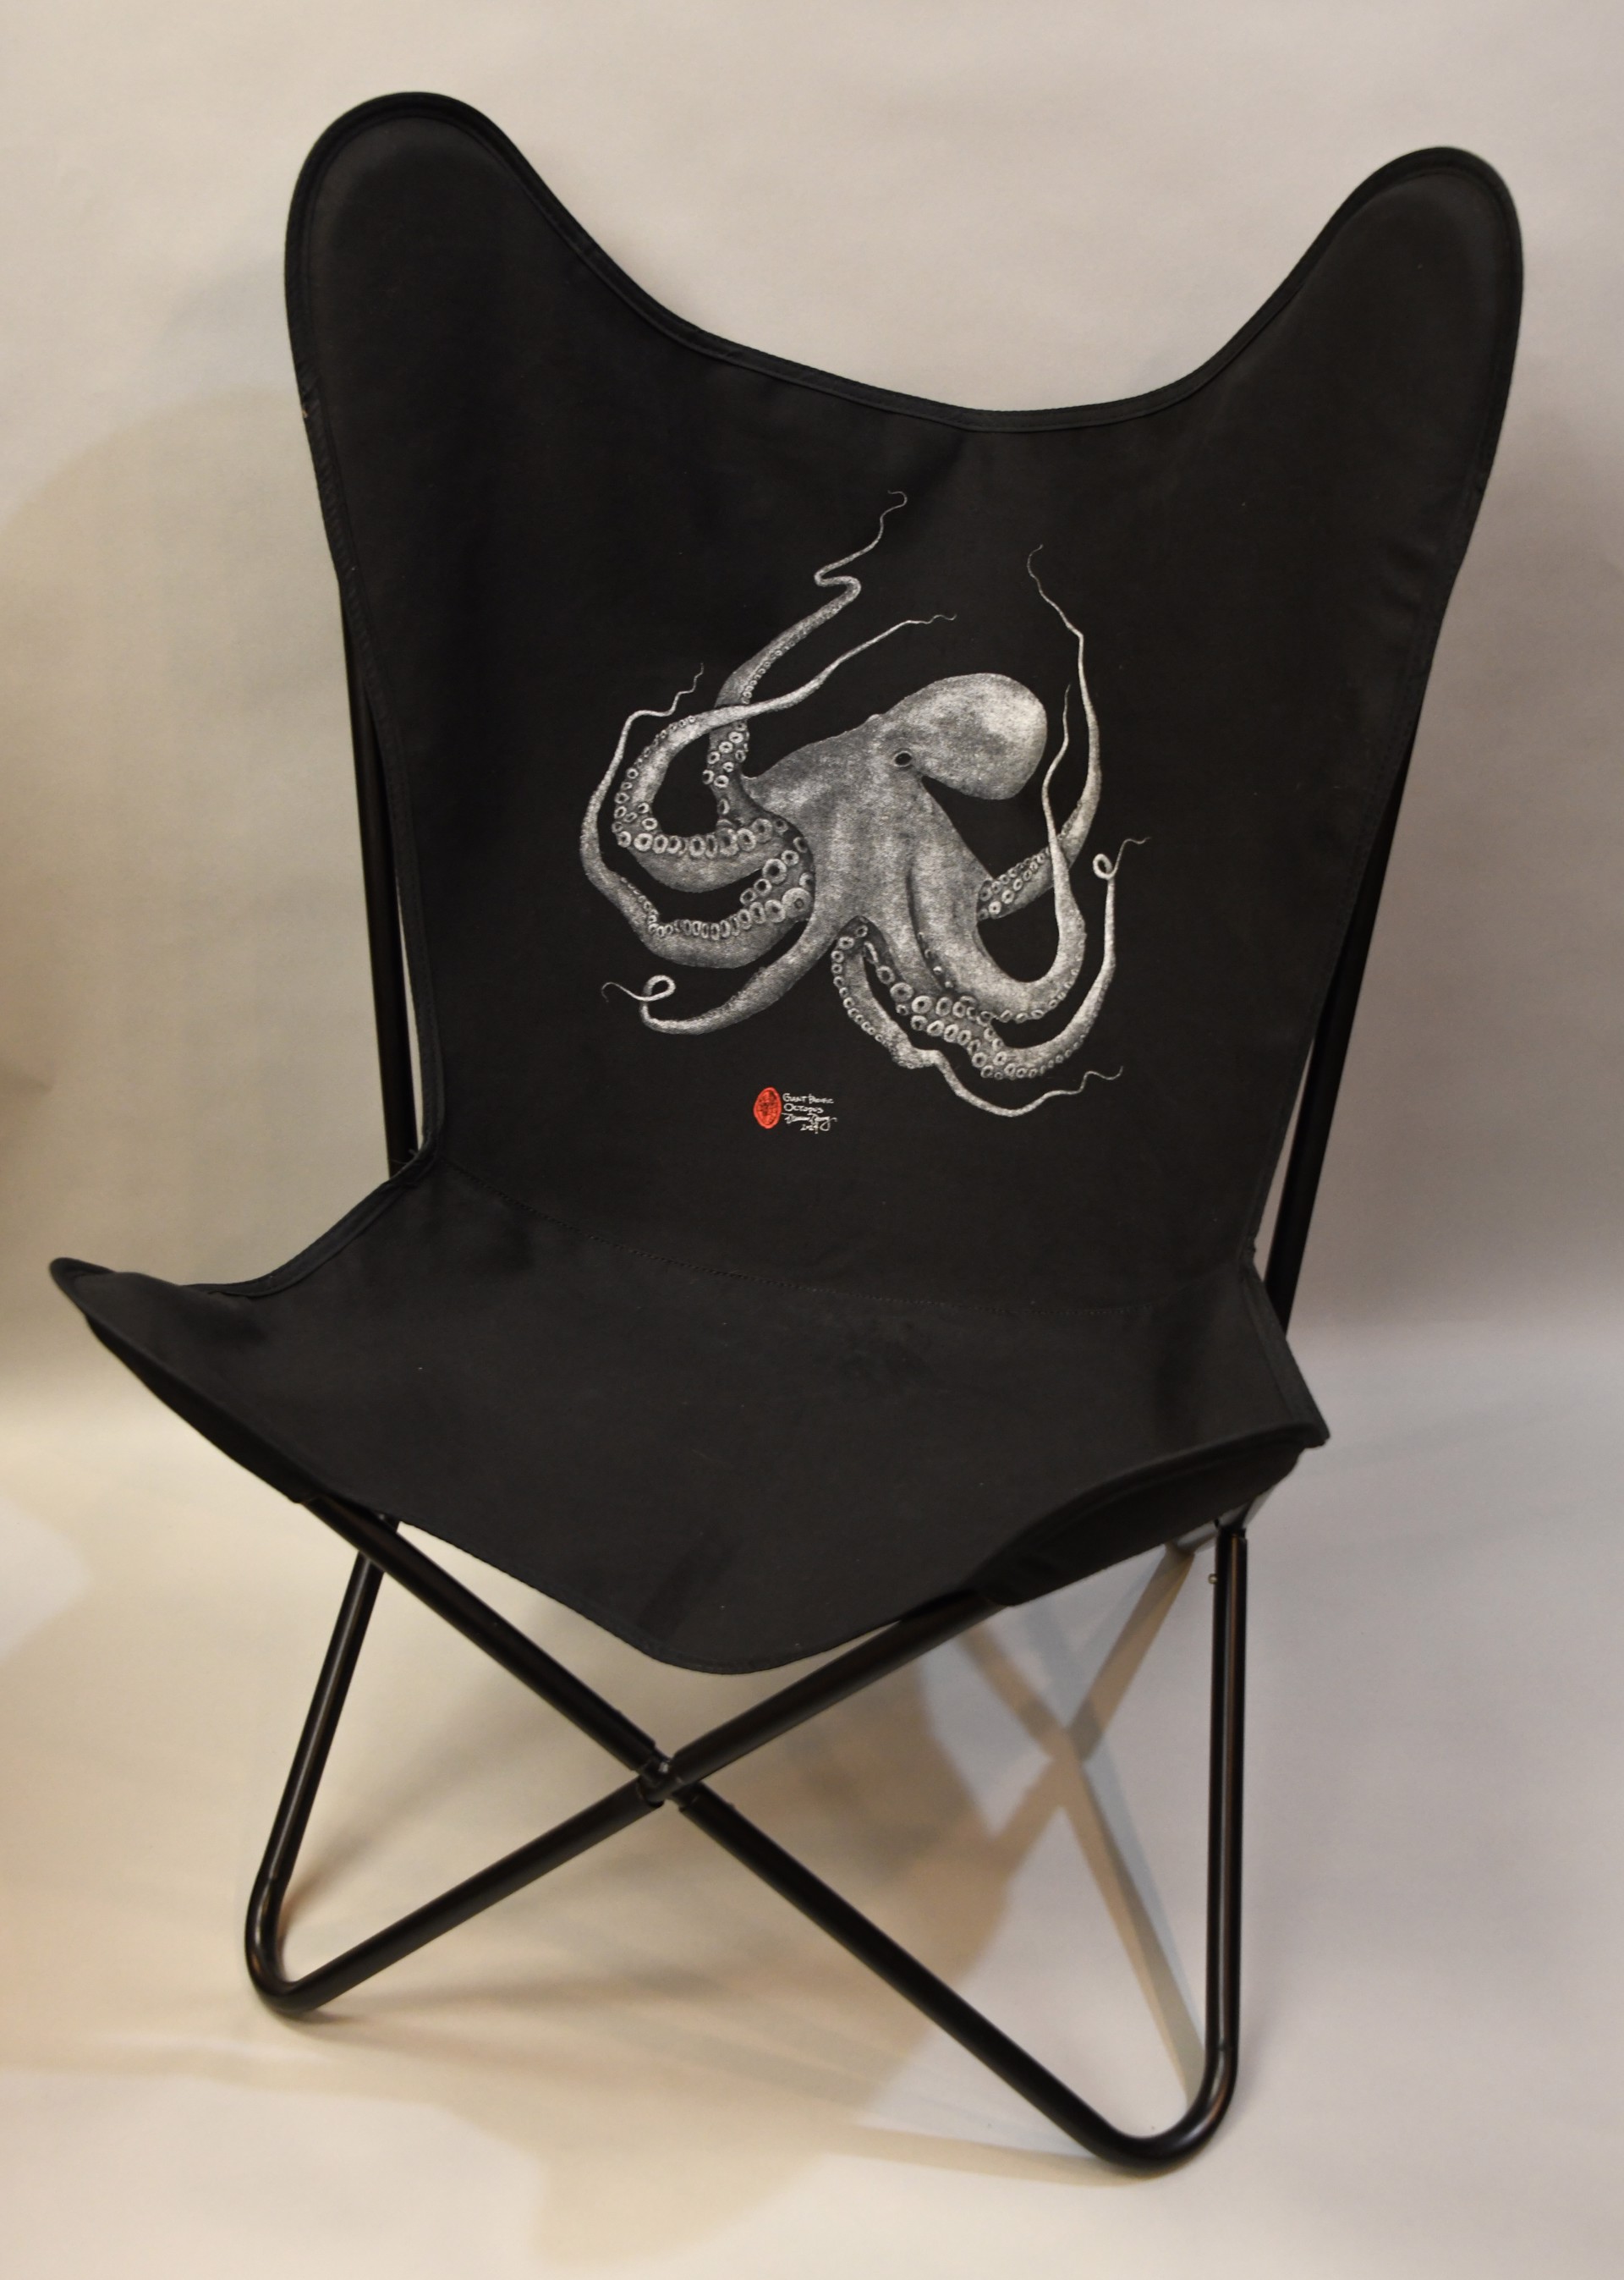 Upwelling: Black Canvas Butterfly Chair by Duncan Berry